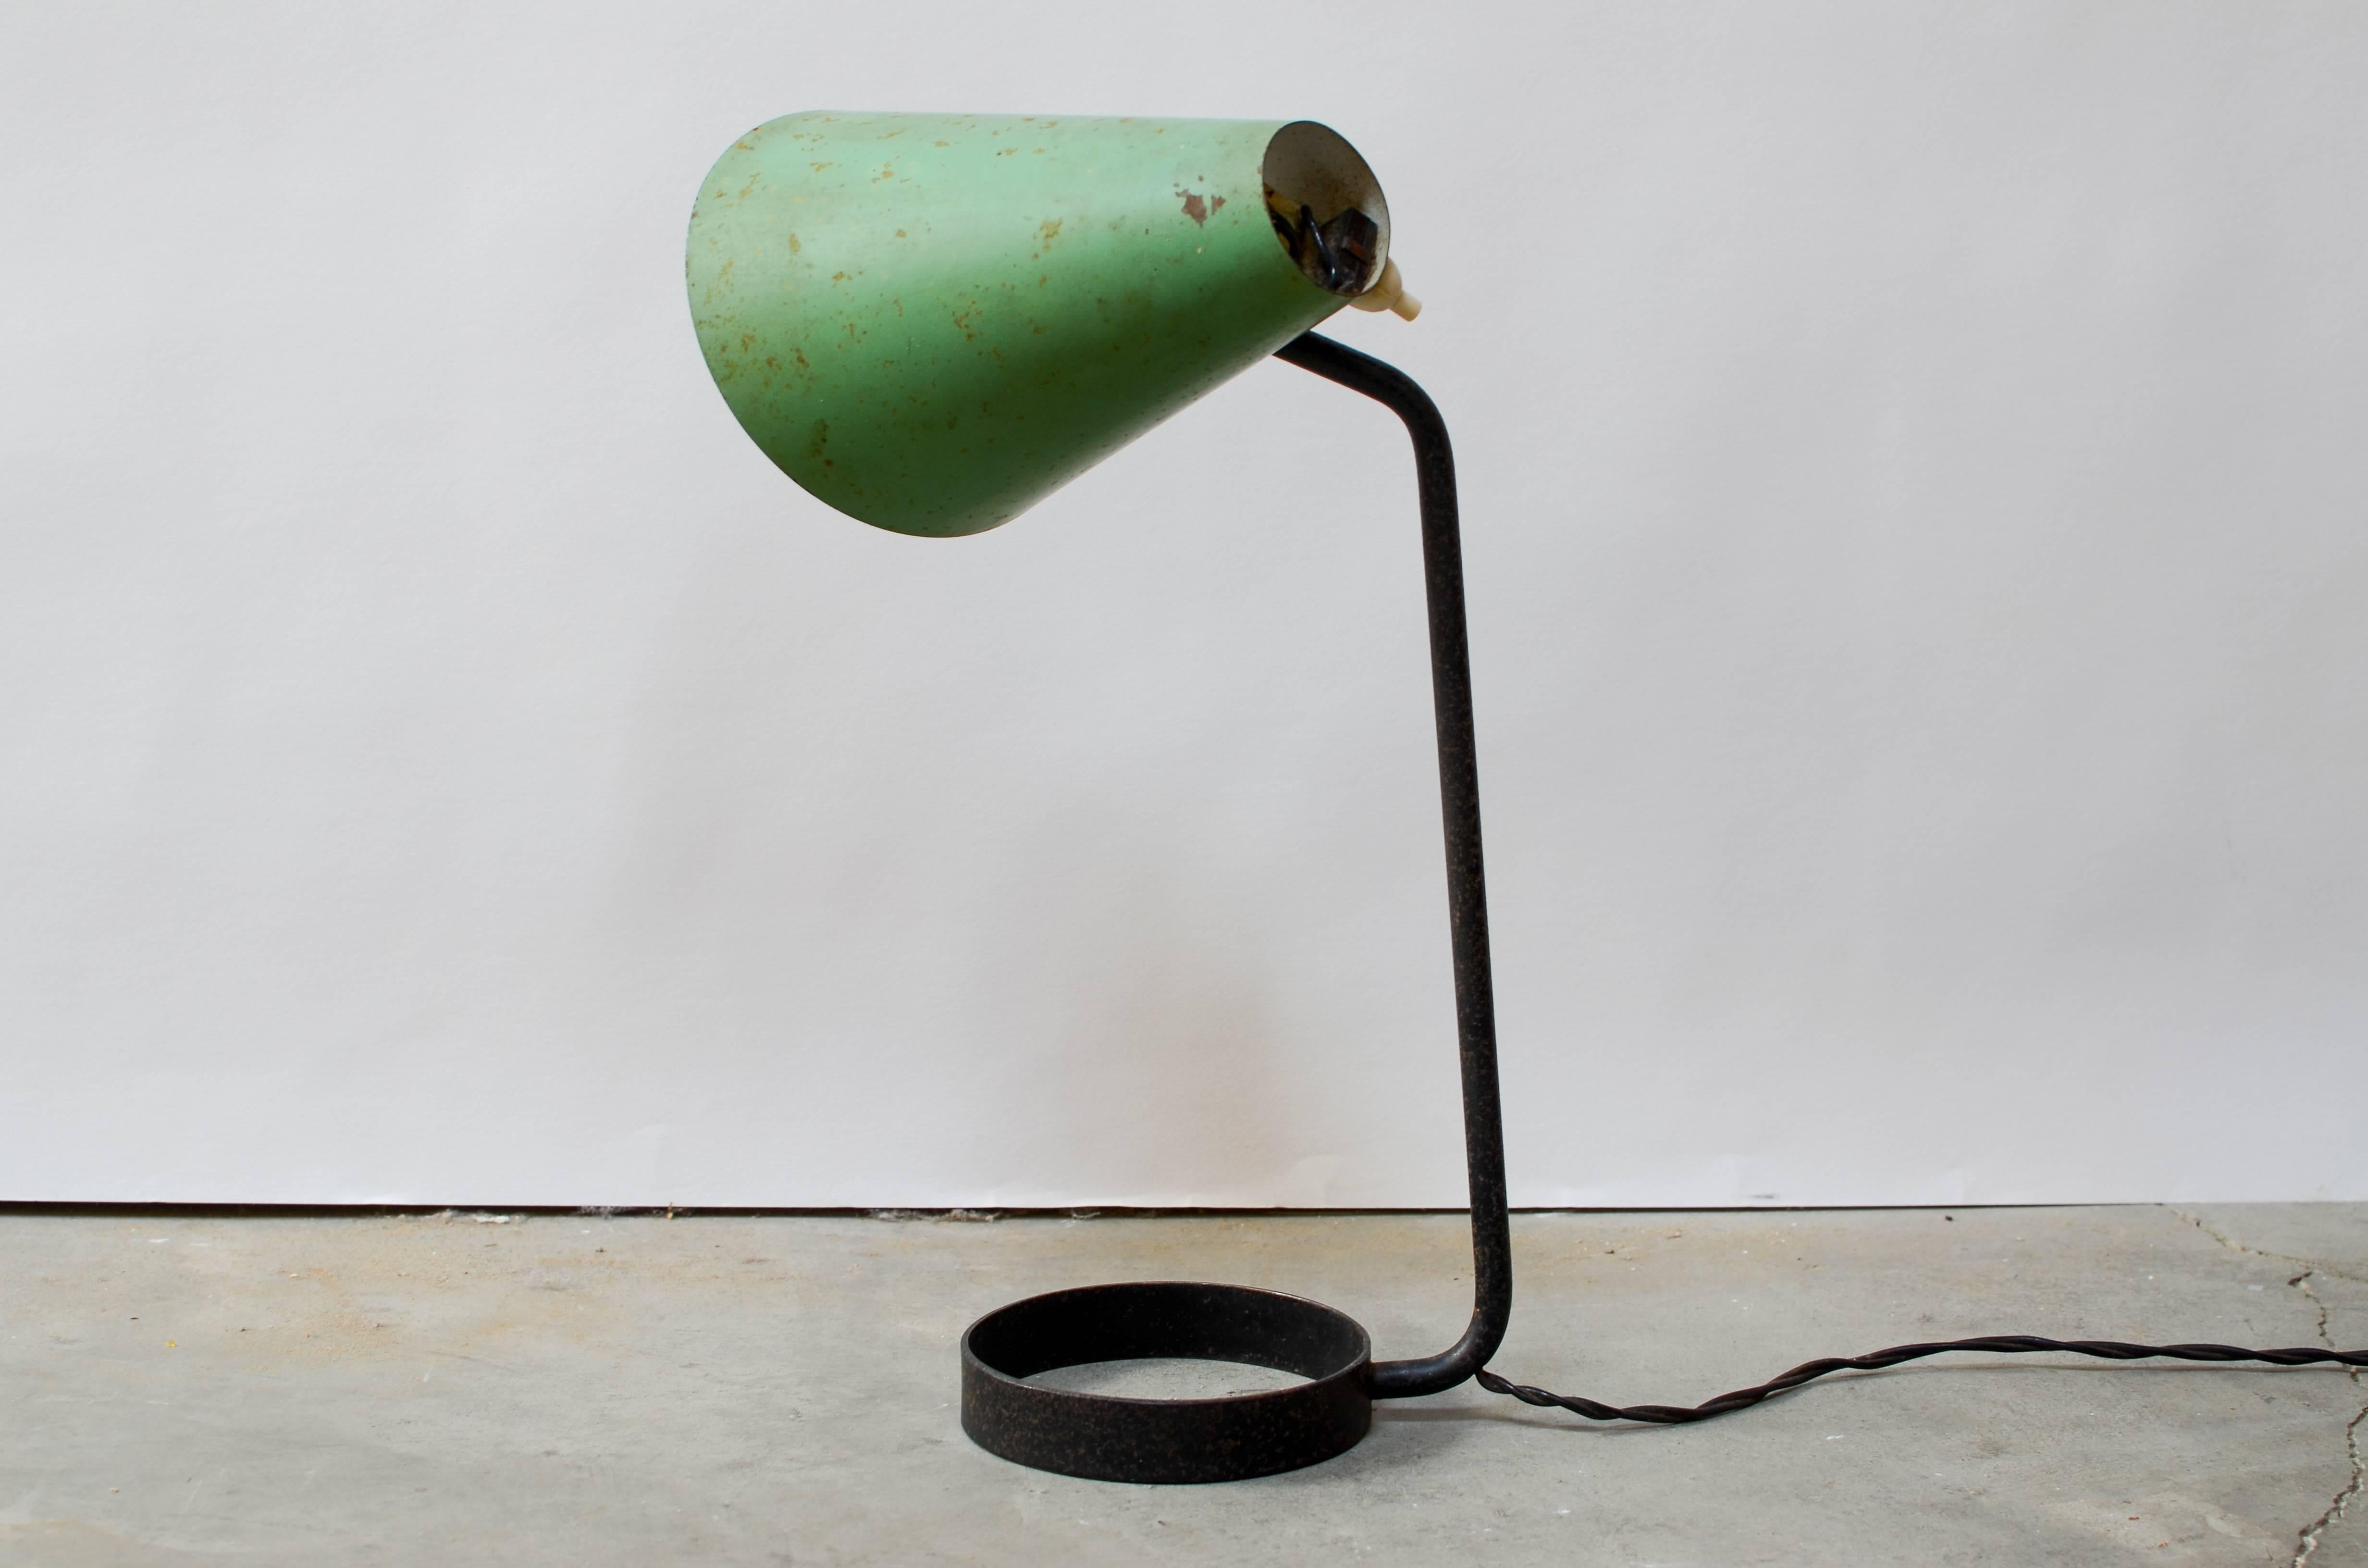 Enameled Jacques Biny Table Lamp, France, 1950s For Sale